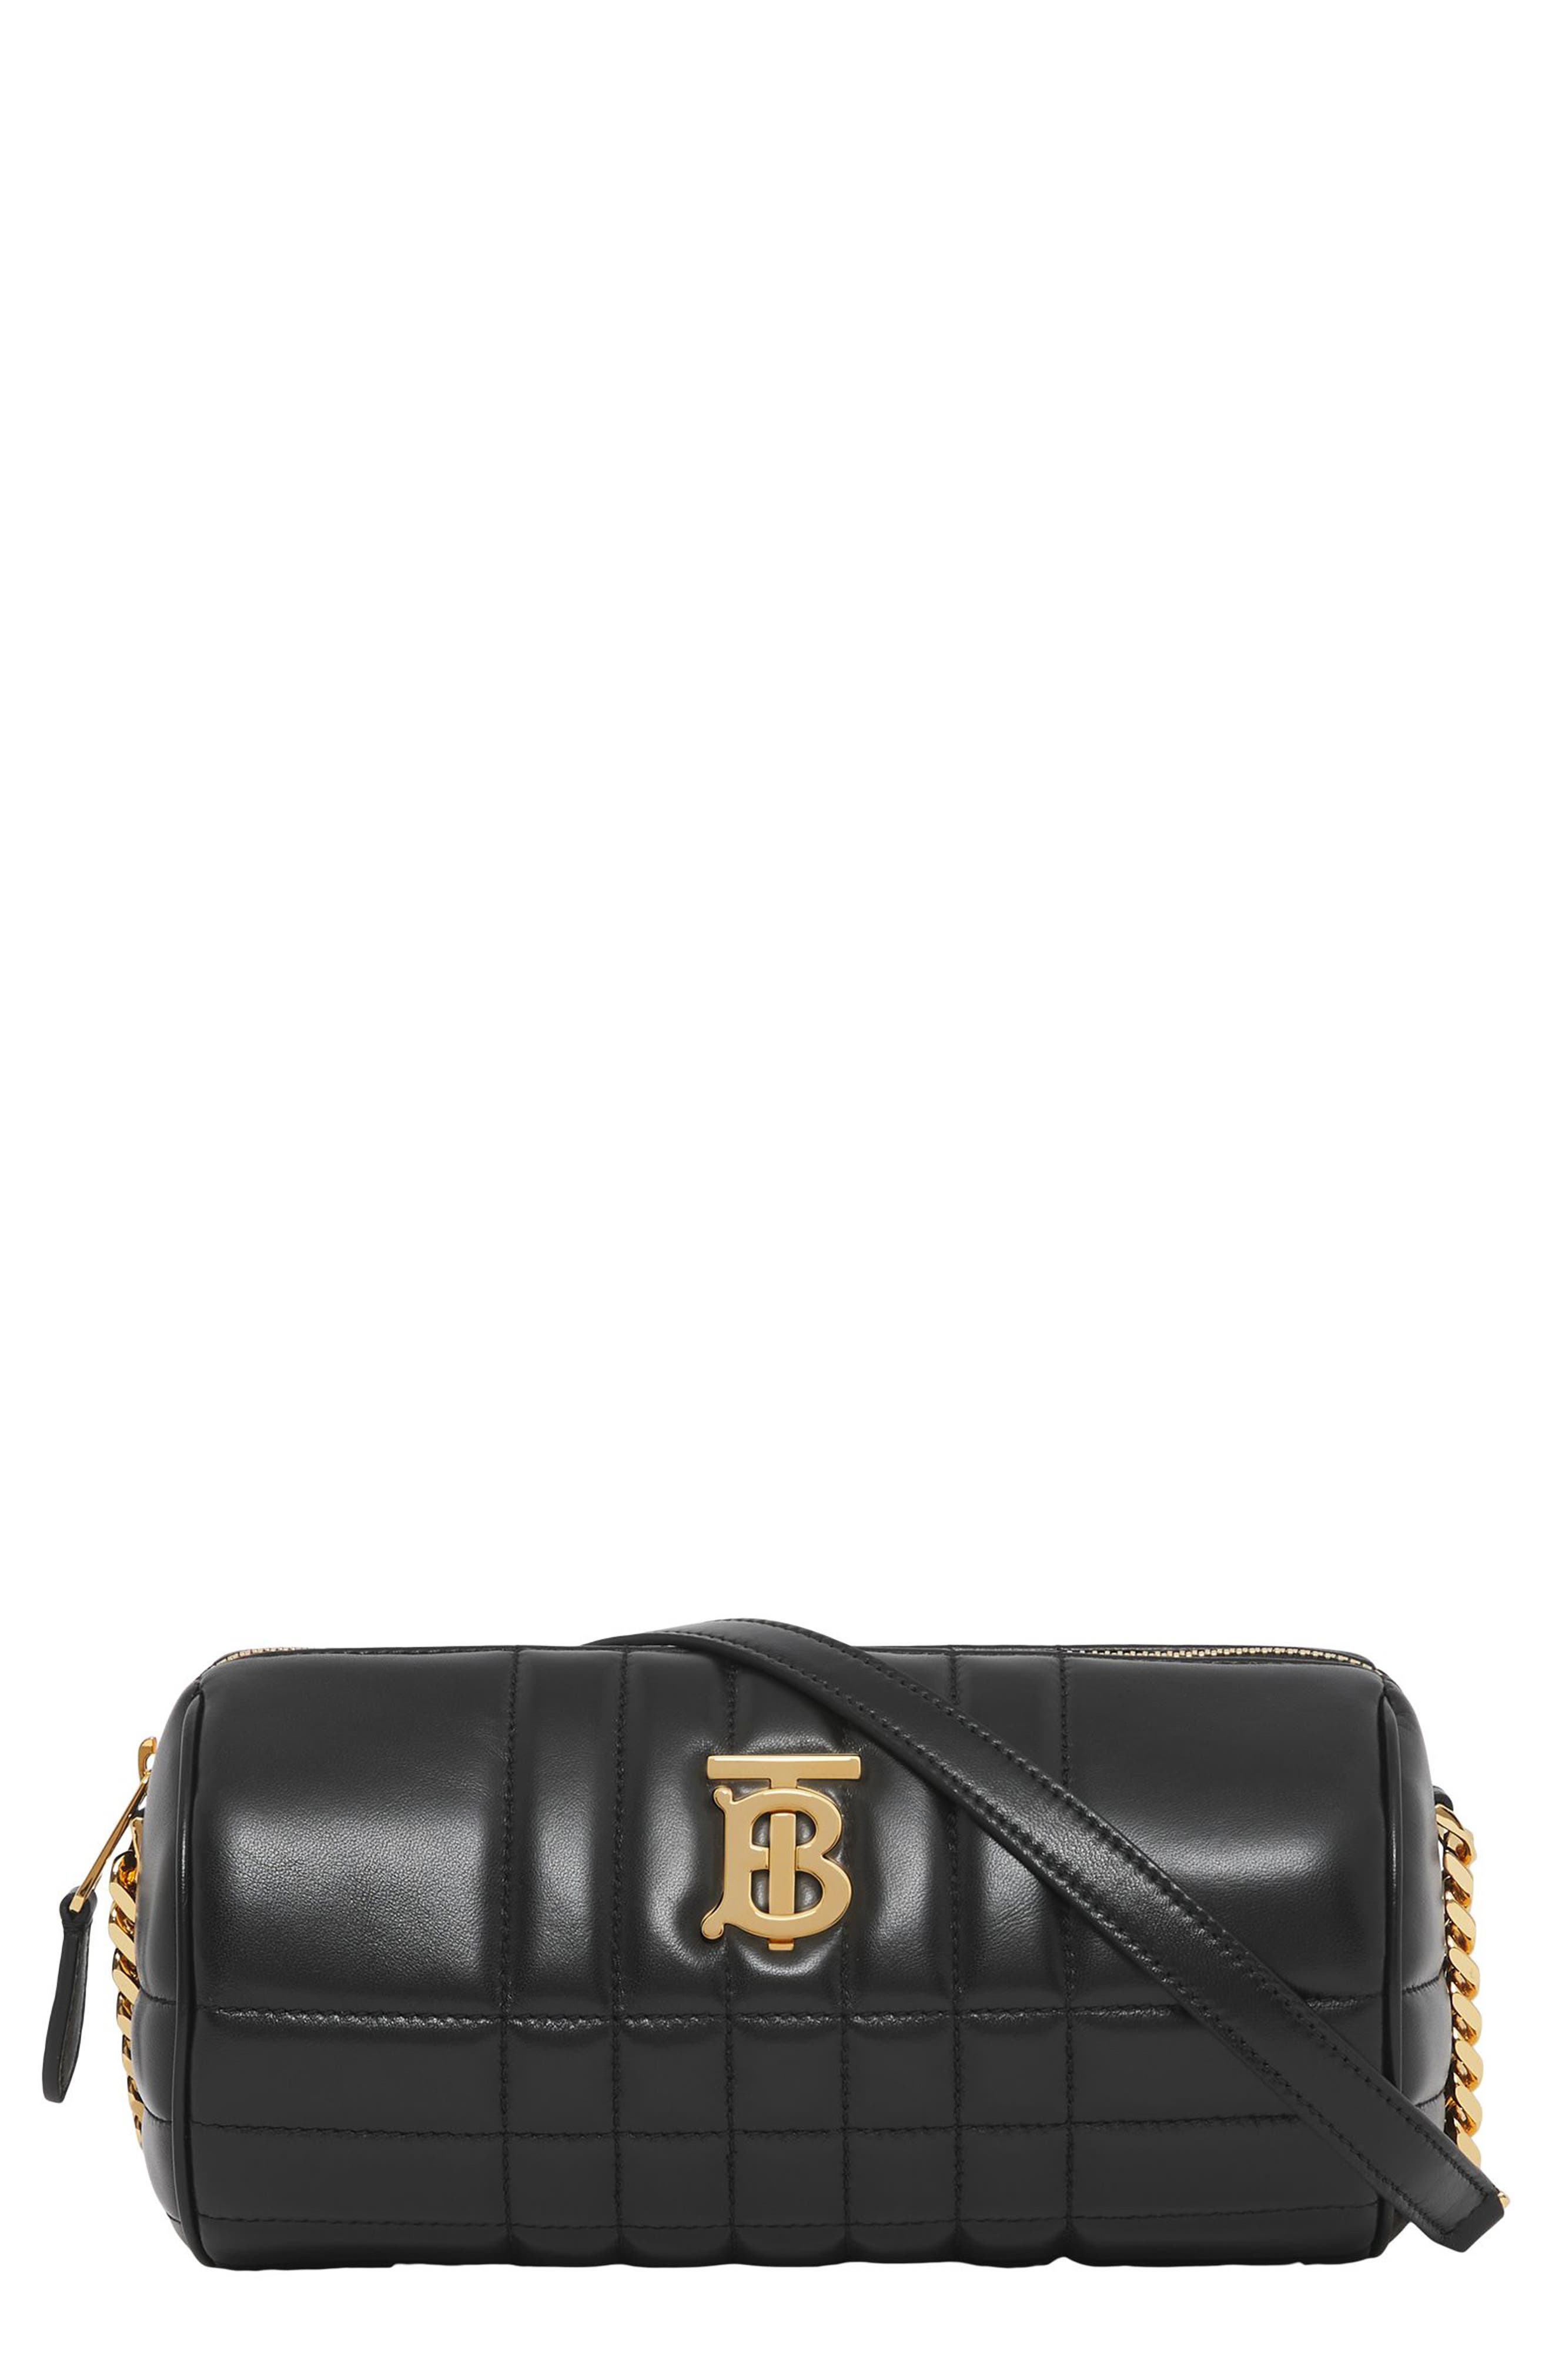 Burberry Lola Check Quilted Leather Barrel Crossbody Bag in Black at Nordstrom